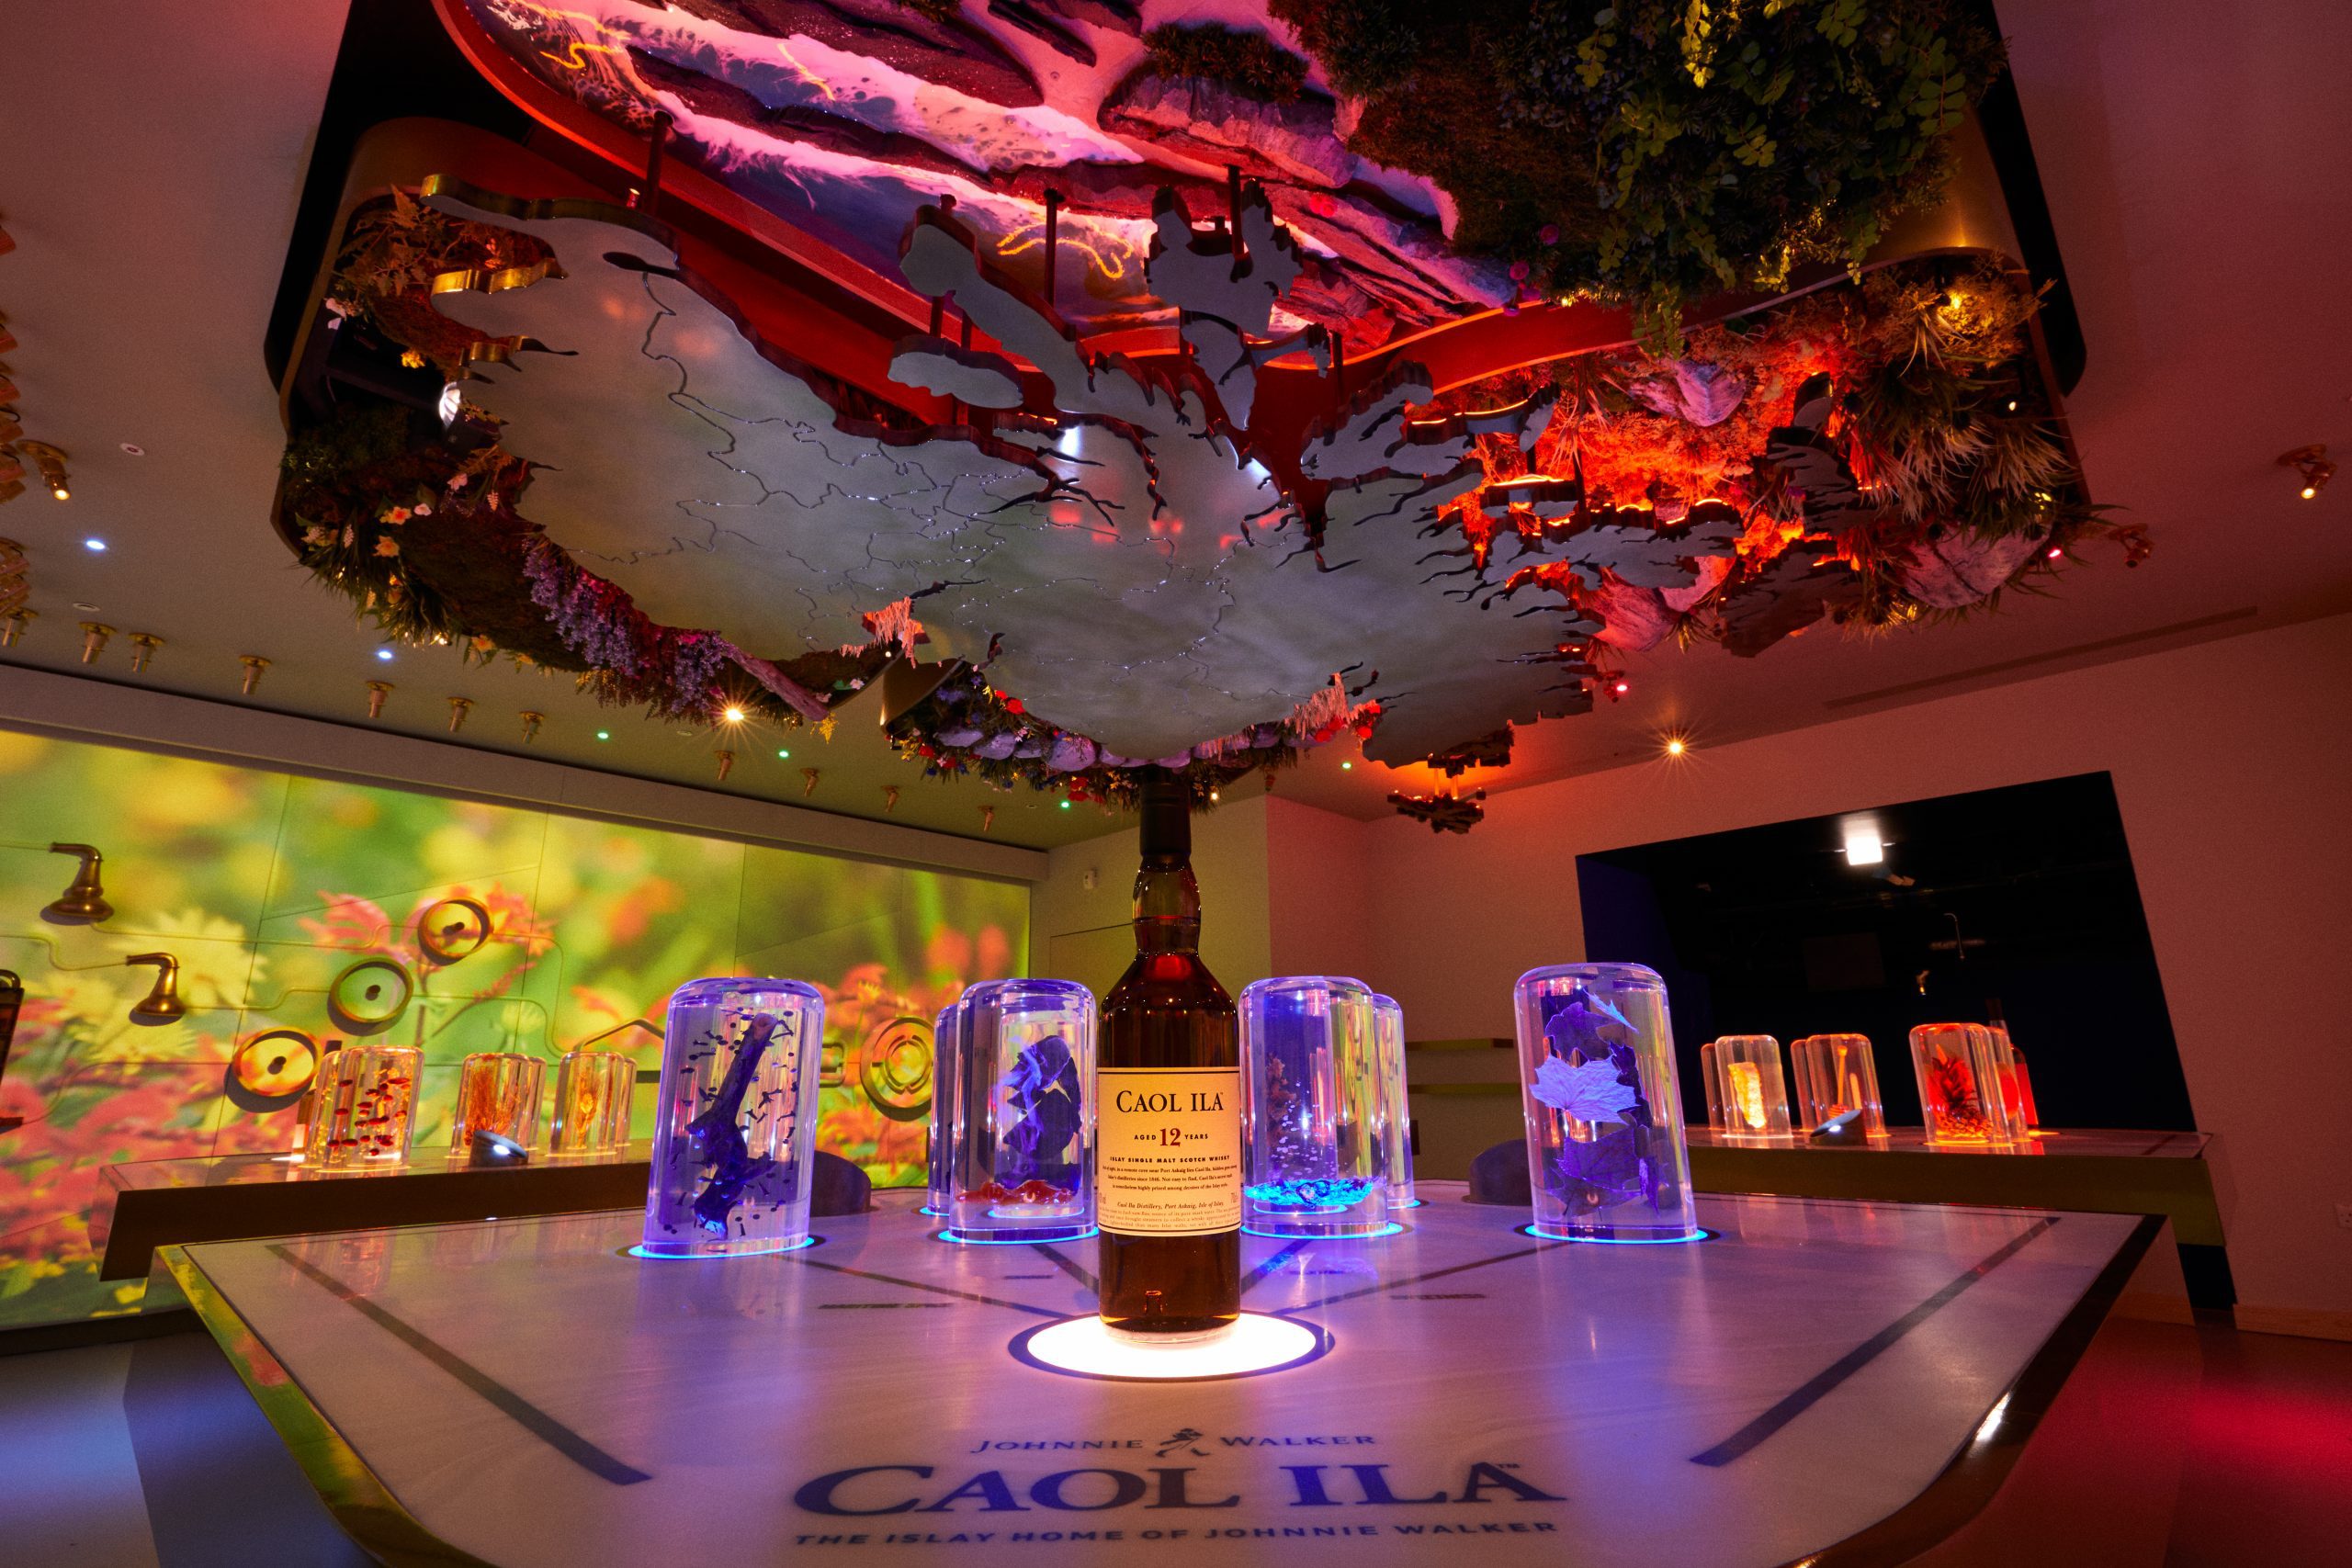 Diageo Have Launched Johnnie Walker Princes Street a New Whisky Visitor Experience for the Worlds Best selling Scotch Whisky in Edinburgh International Whiskey Reviews by Irish Whiskey Blogger Stuart Mcnamara